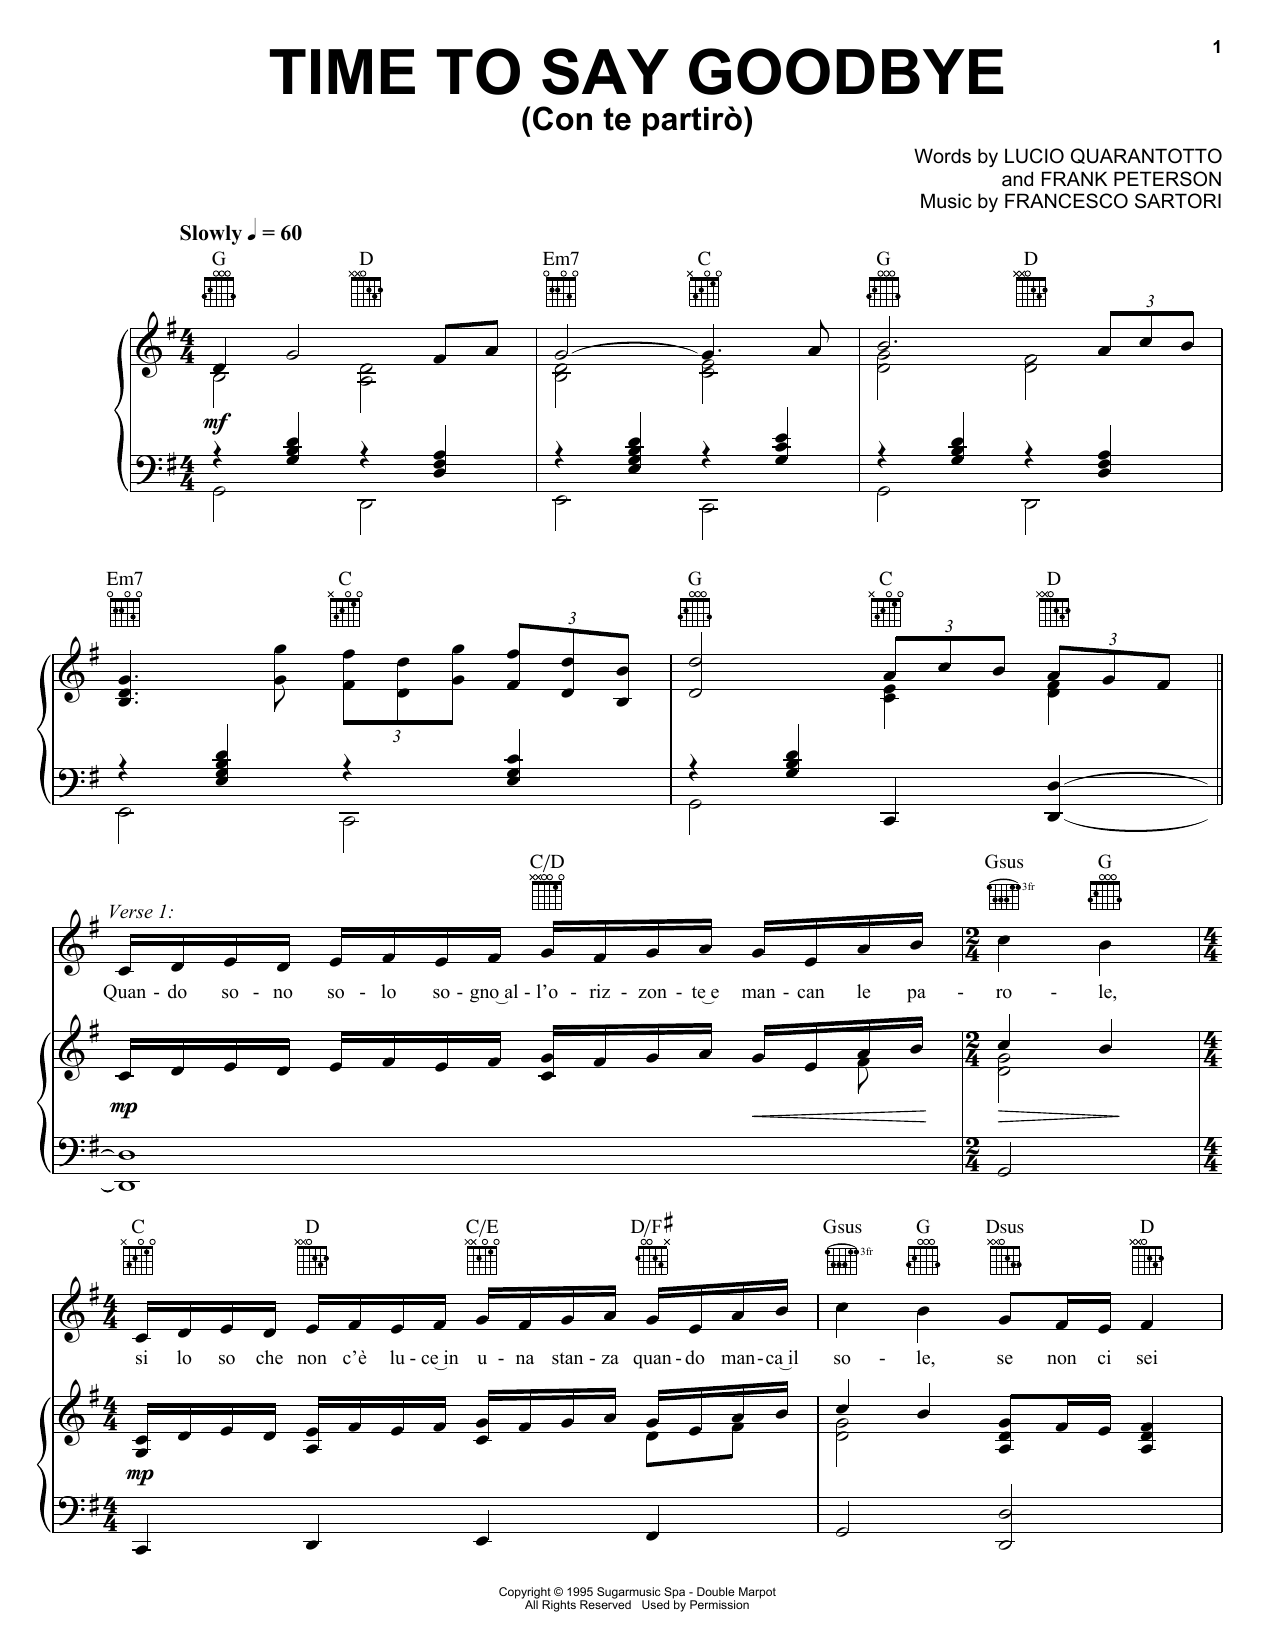 Download Sarah Brightman with Andrea Bocelli Time To Say Goodbye Sheet Music